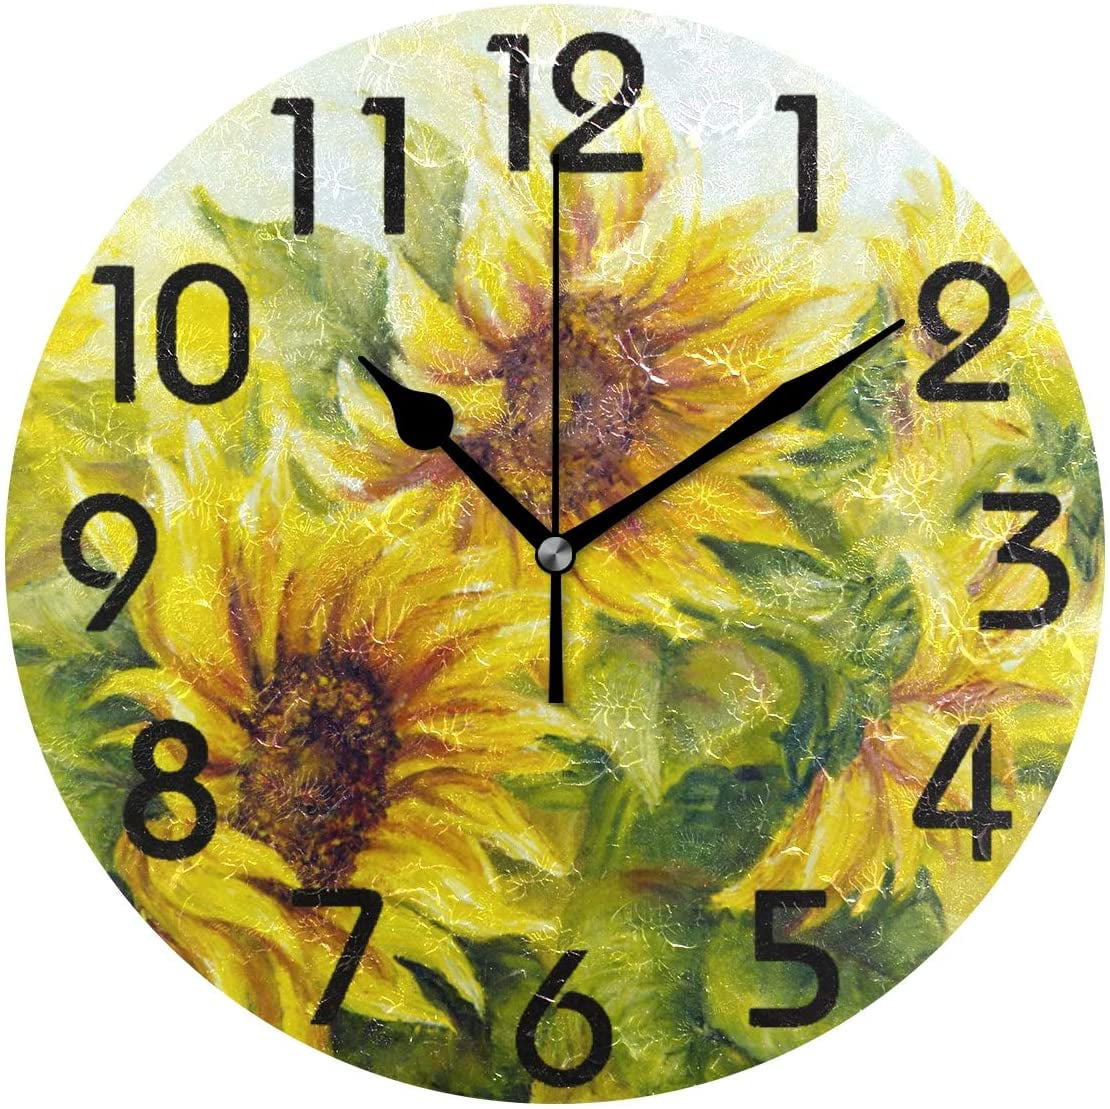 Pink Flowers and Leaves on Gray Rose Floral Tile Wall Clock 9.5 Inch Non-Ticking Silent Clocks Round Bathroom Clock Battery Operated Quartz Analog Decorative Desk Clock for Living Room